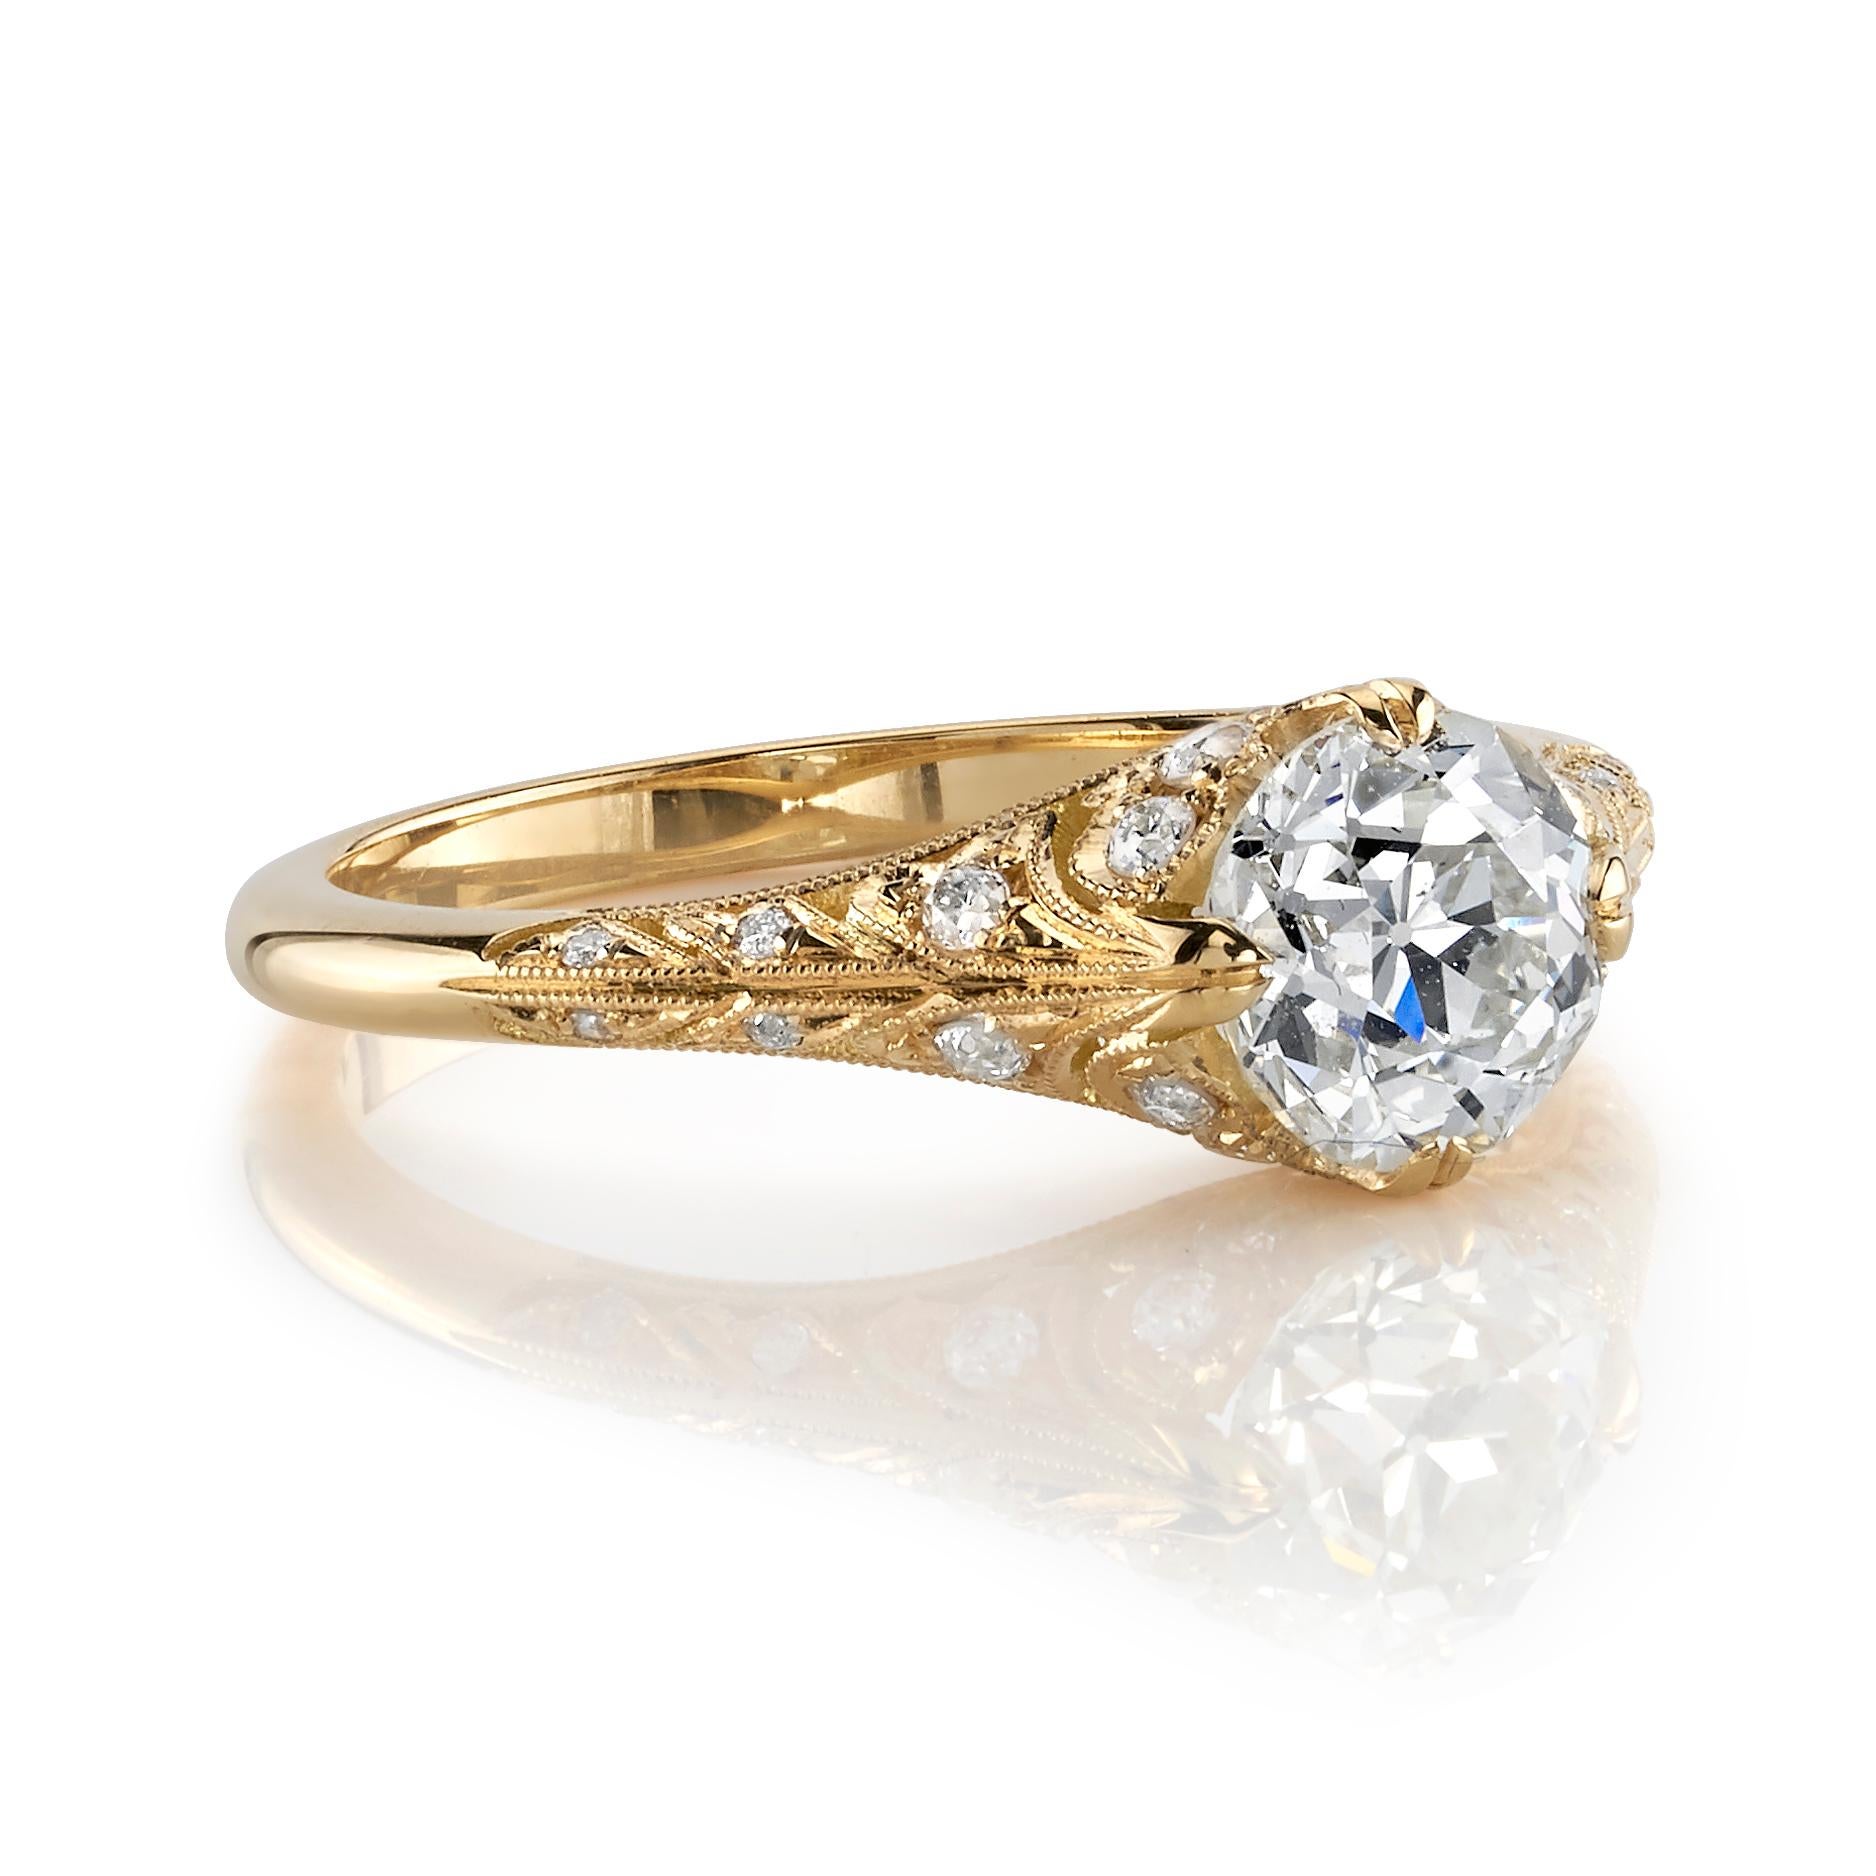 1.04ct K/SI1 GIA certified old European cut diamond with 0.18ctw accent diamonds set in a handcrafted 18K yellow gold mounting. Ring is currently a size 6 and can be sized to fit.